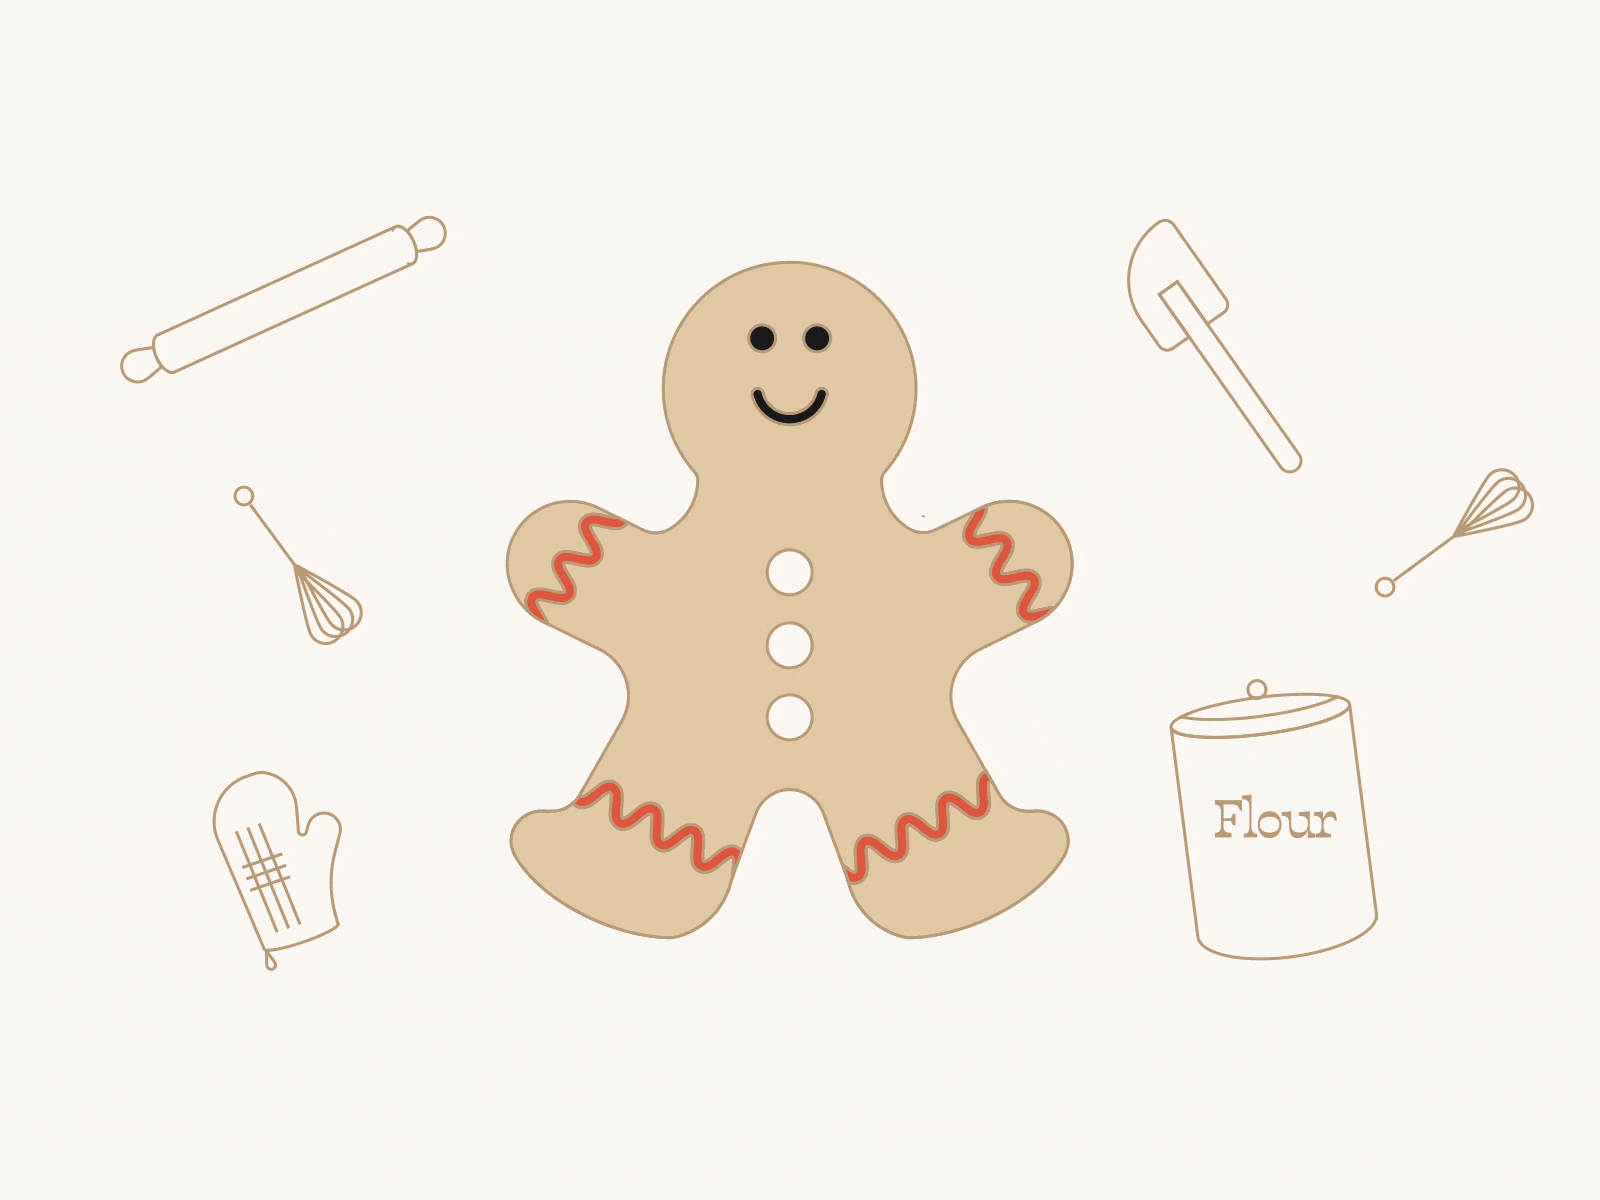 Day 7 - Gingerbread Man